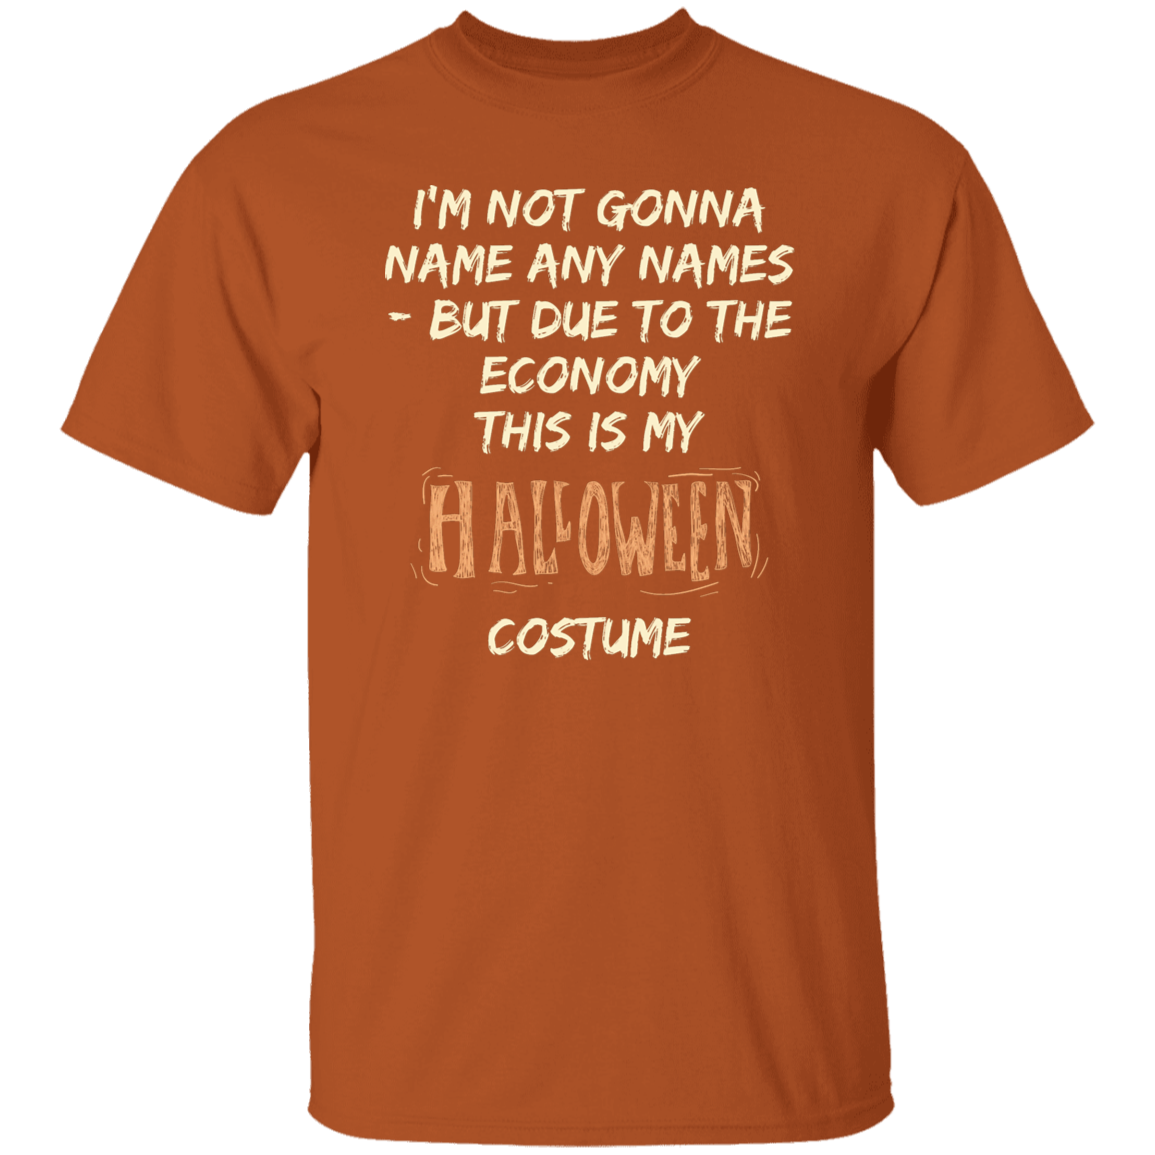 I'm Not Gonna Name Names, But Due To The Economy - This Is My Halloween Costume